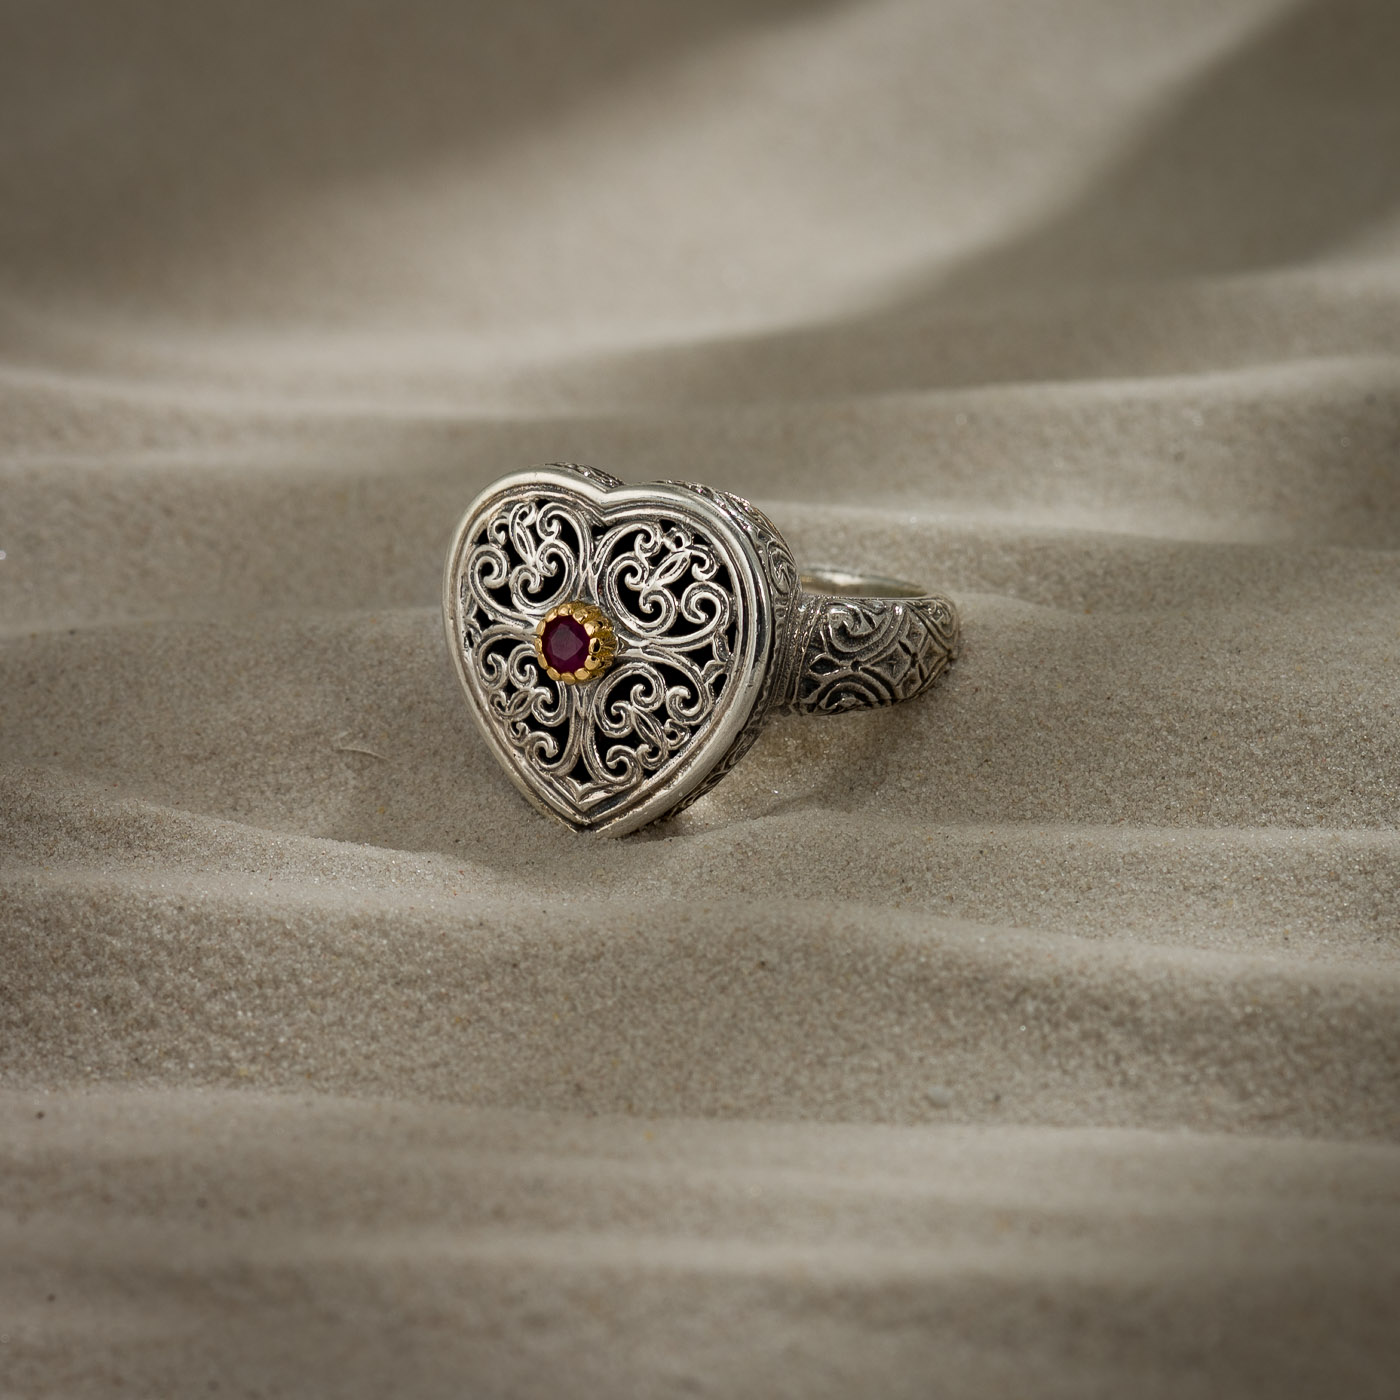 Mediterranean Heart Ring in Sterling Silver with 18K Gold details